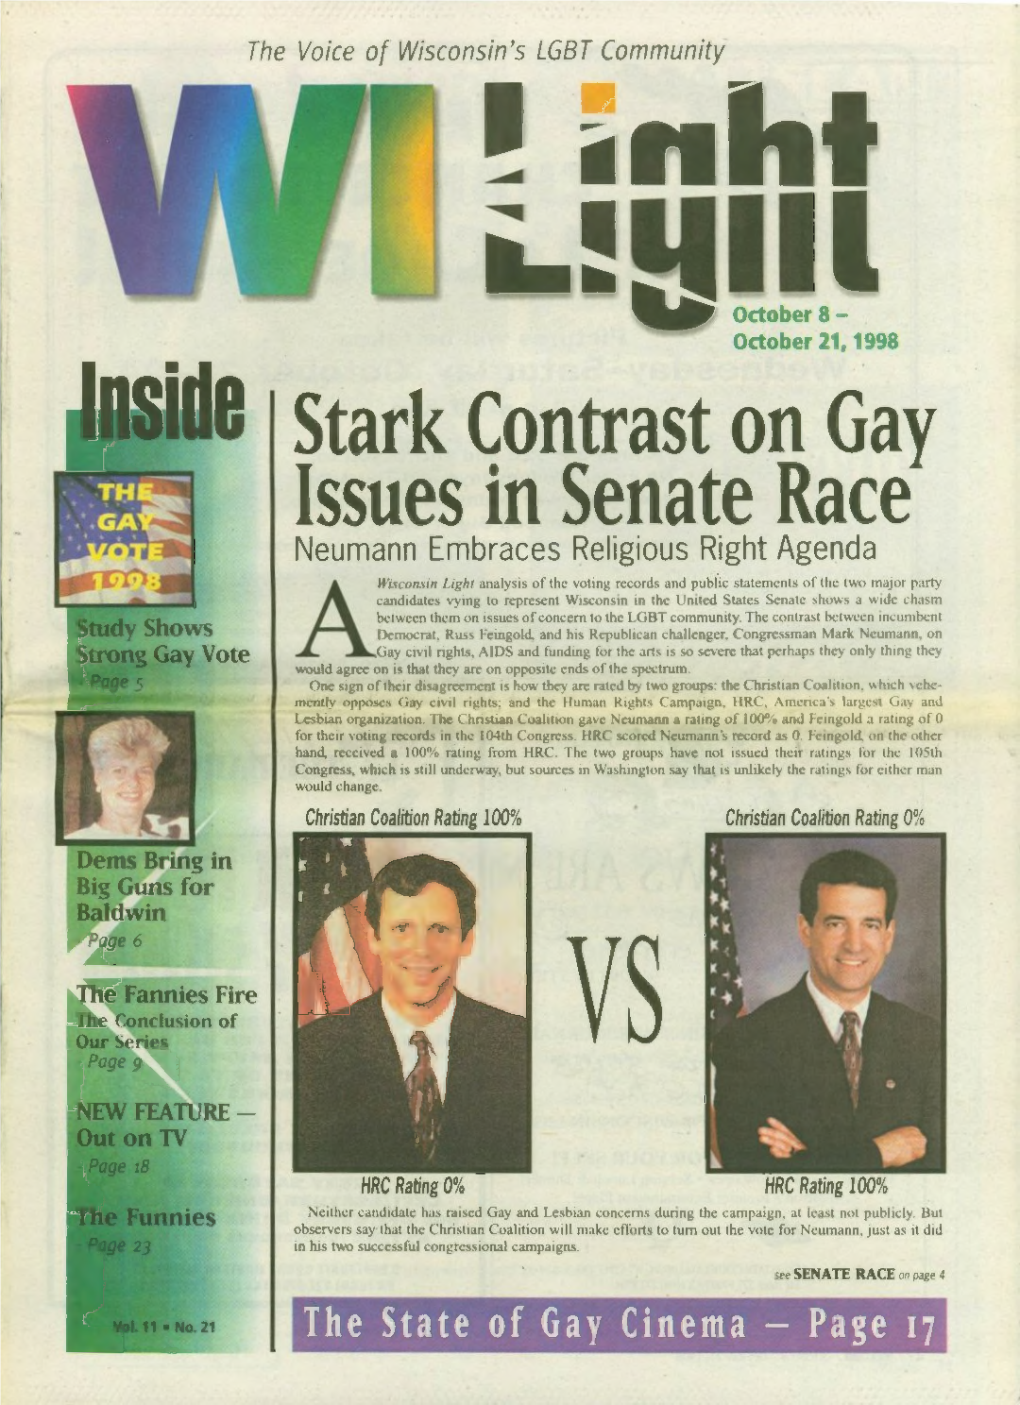 Stark Contrast on Gay Issues in Senate Race